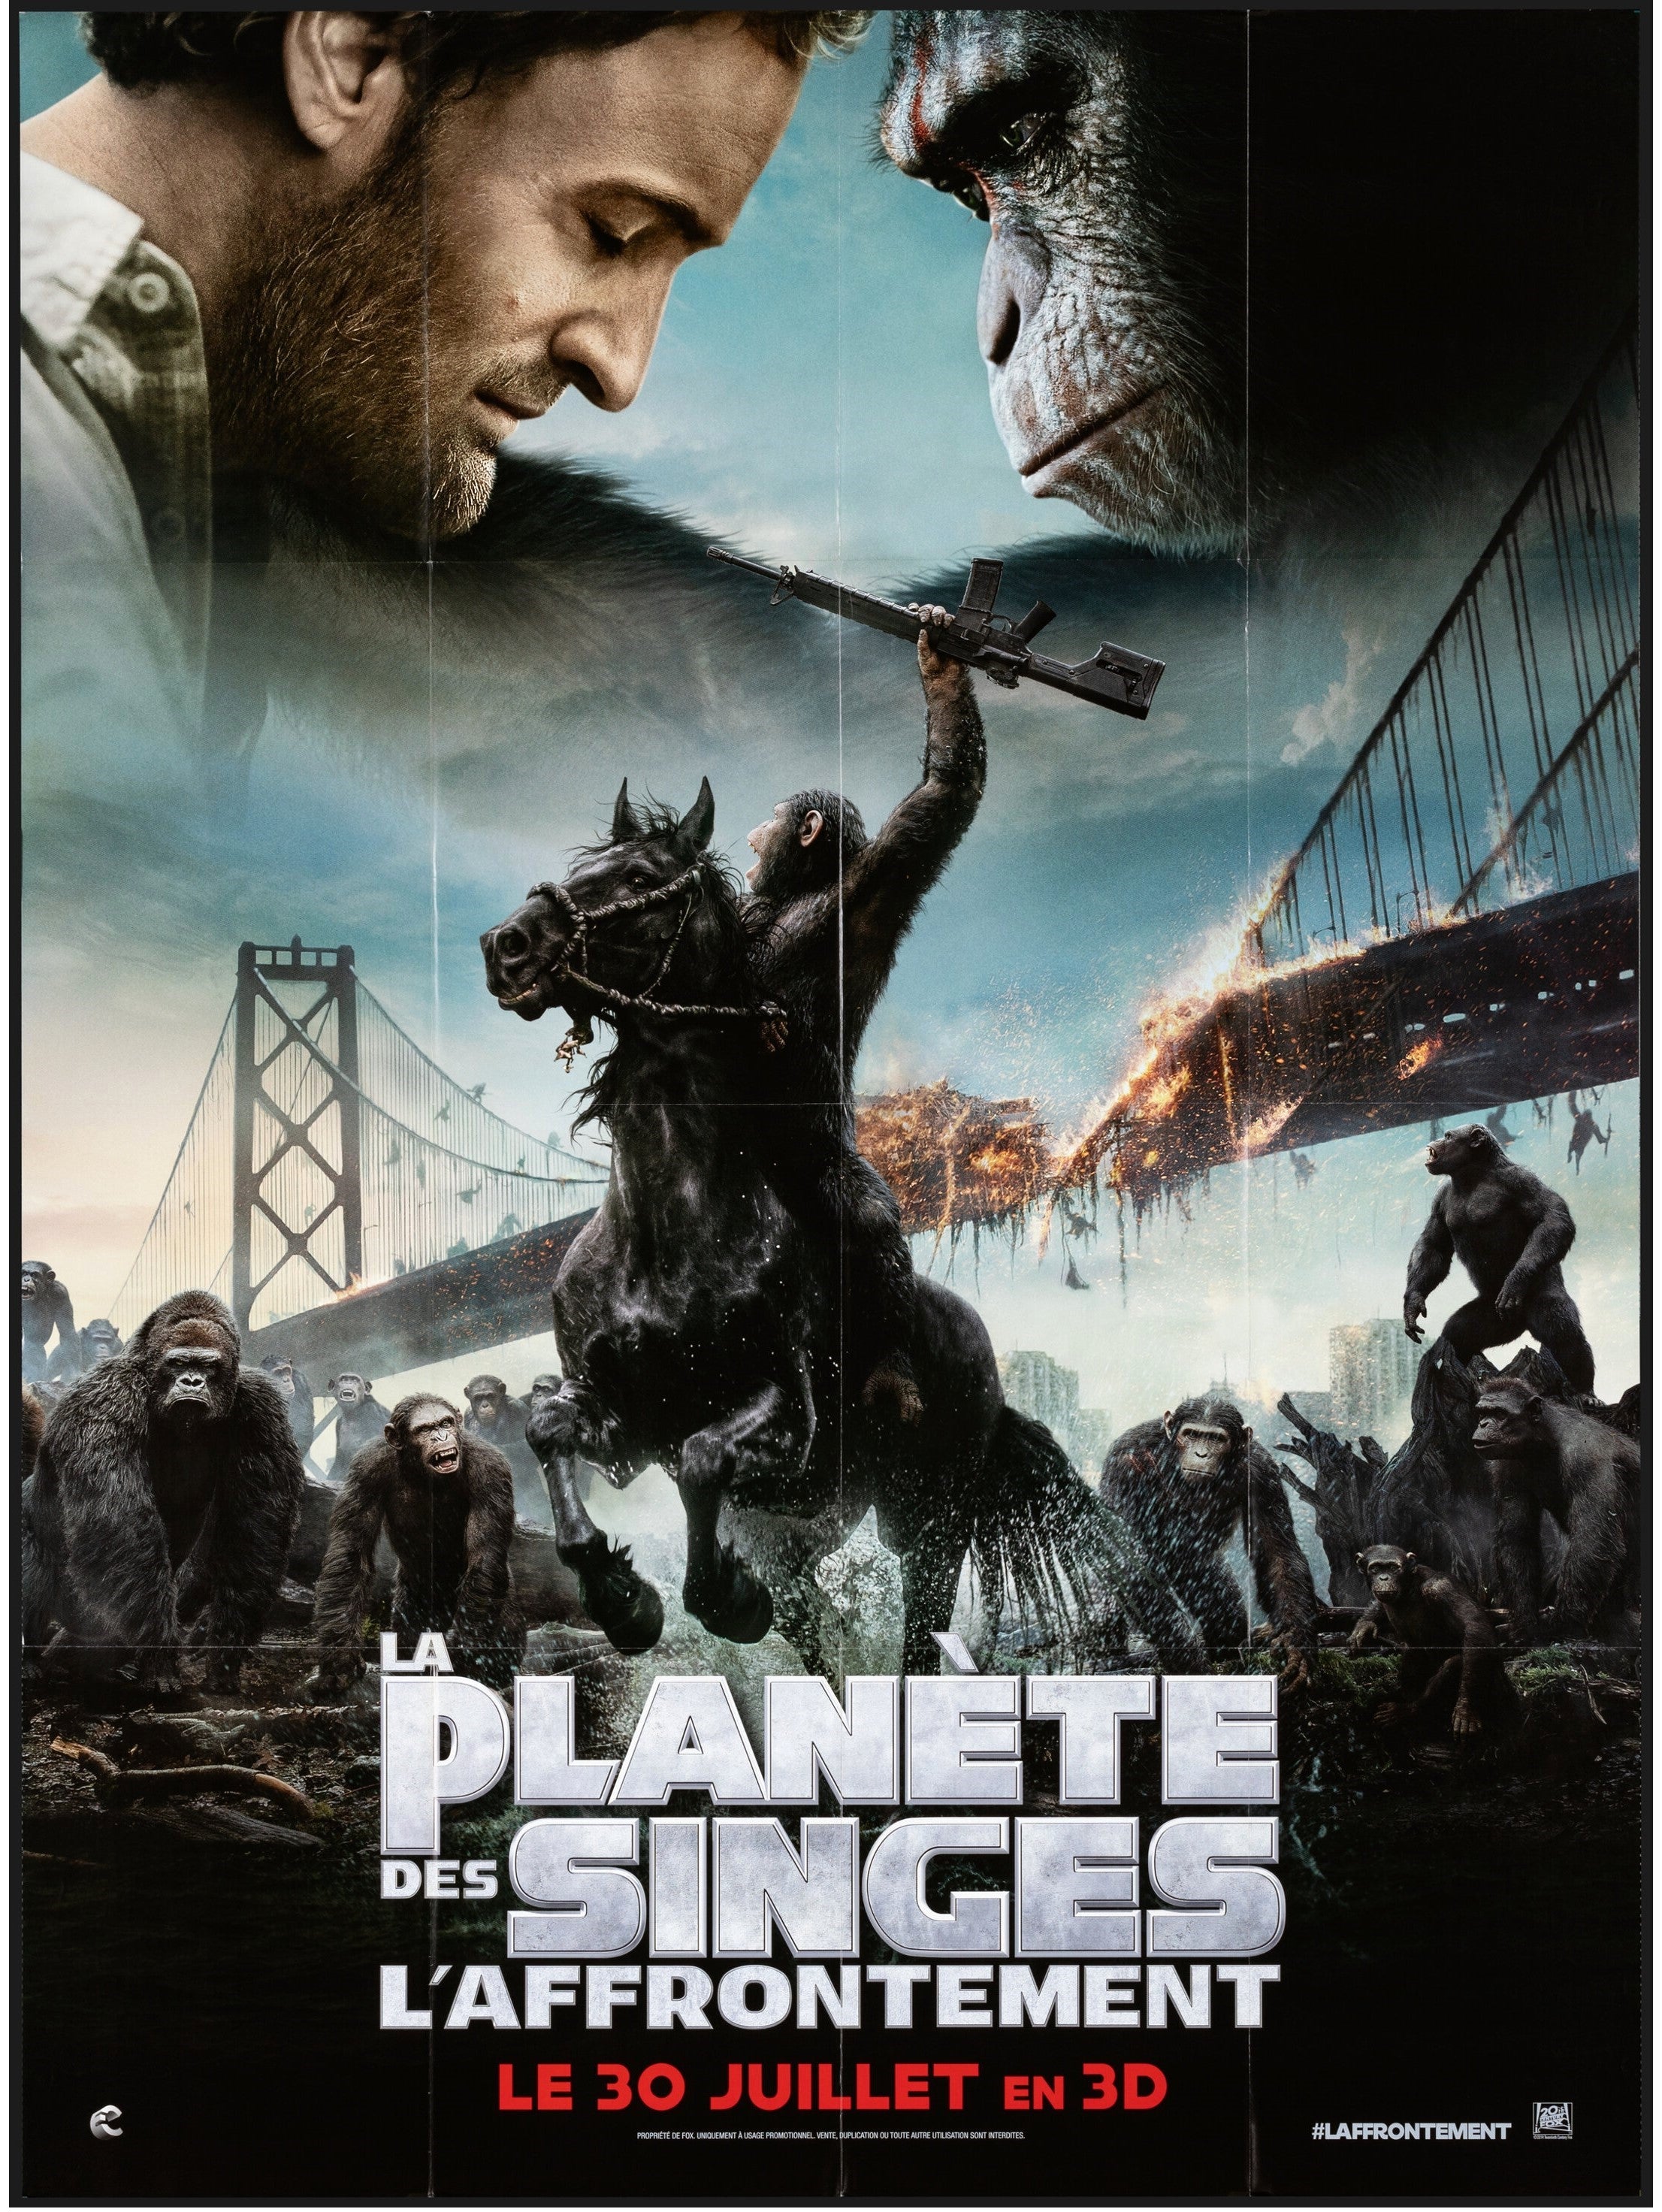 DAWN OF THE PLANET OF THE APES (2014)